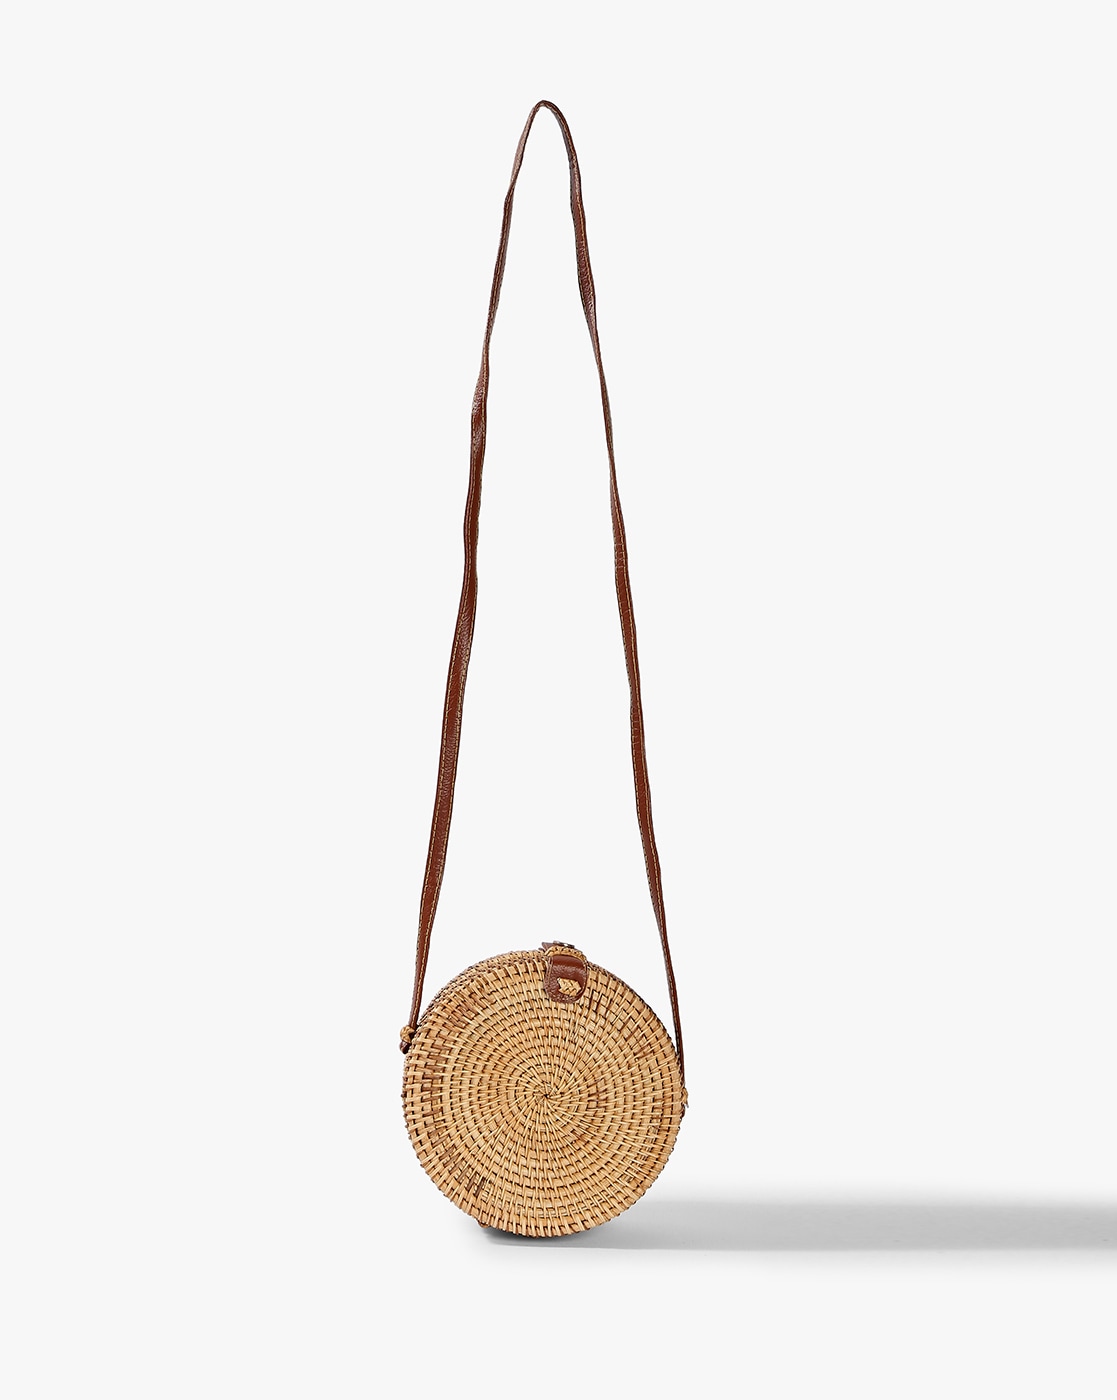 Buy Round Wicker Bag Online In India -  India